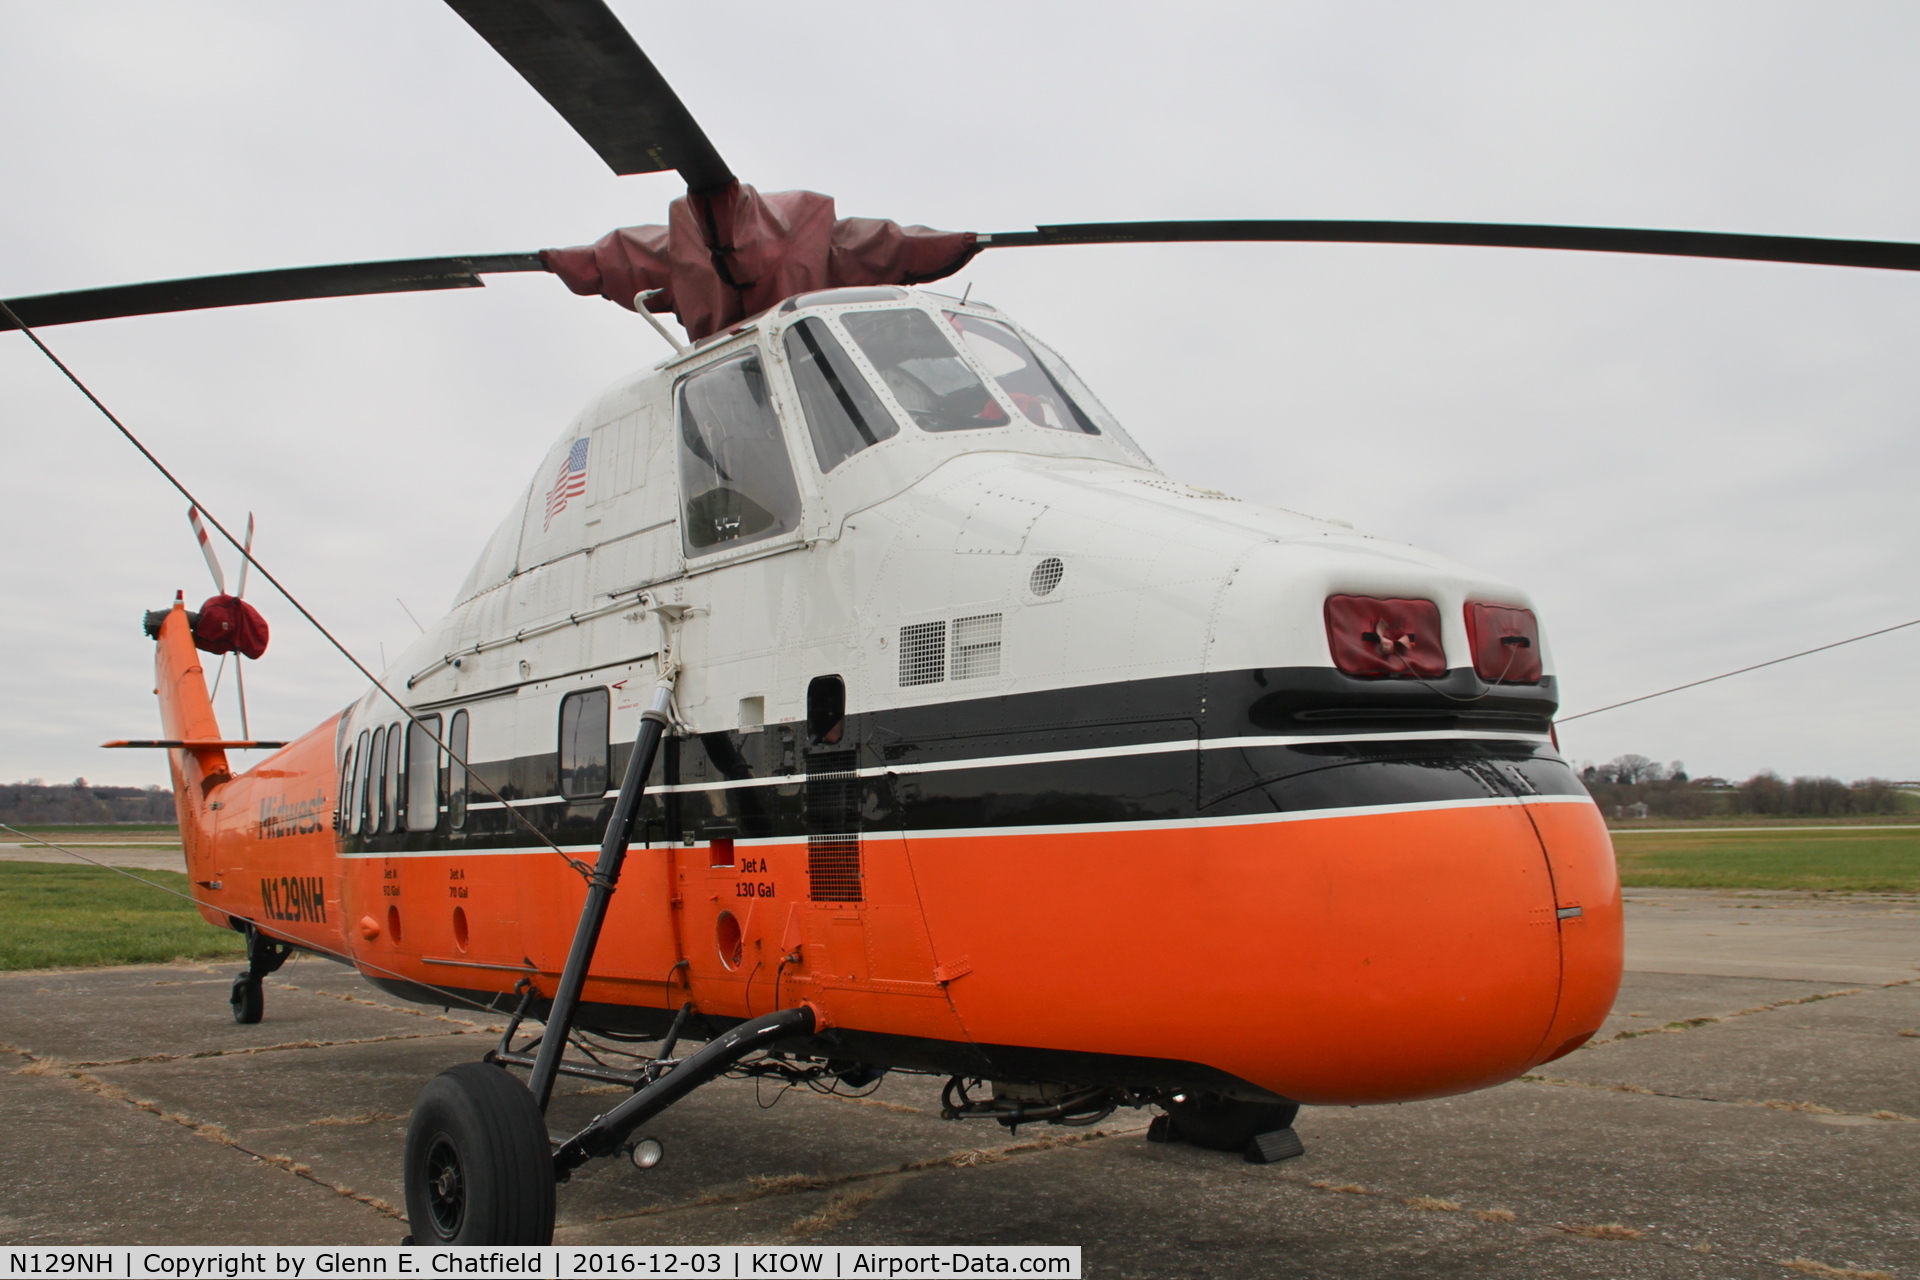 N129NH, 1975 Sikorsky S-58JT C/N 58-855, Spied on the ramp and it needed to be photographed